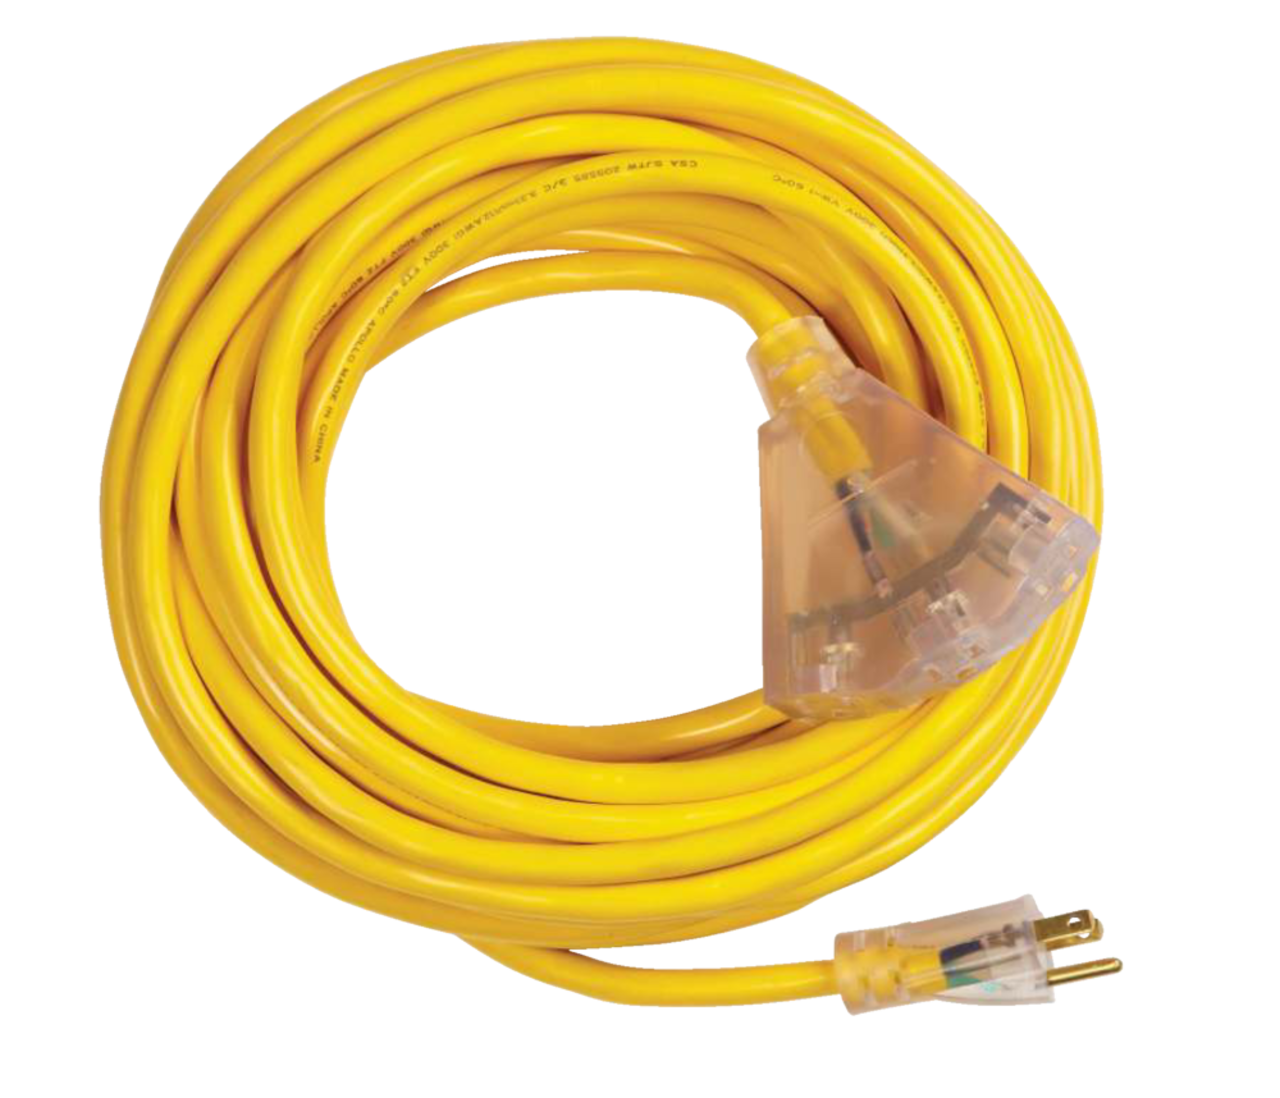 Mastercraft 12/3 Yellow Outdoor Extension Cord with 3 Grounded